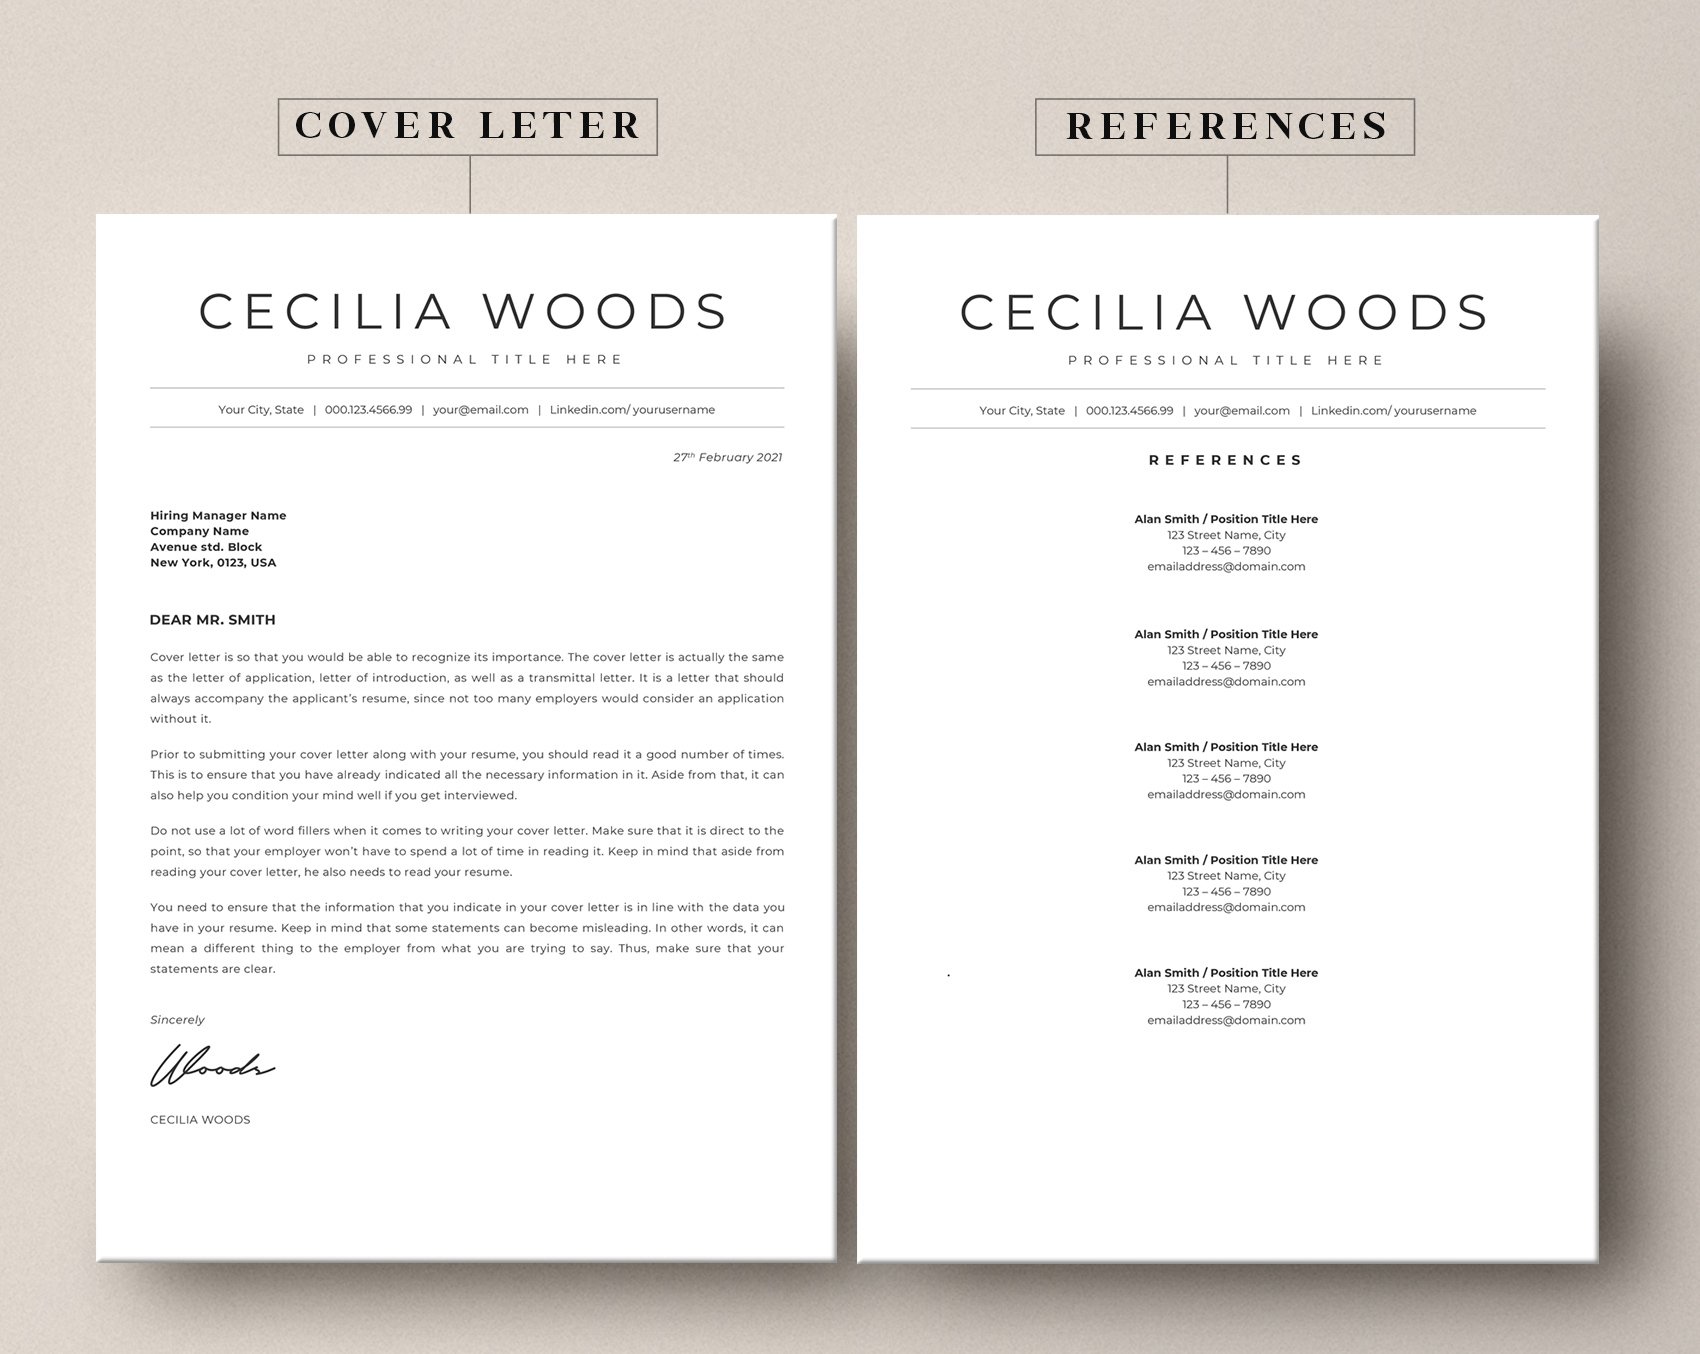 Two resume templates with a cover letter and references.